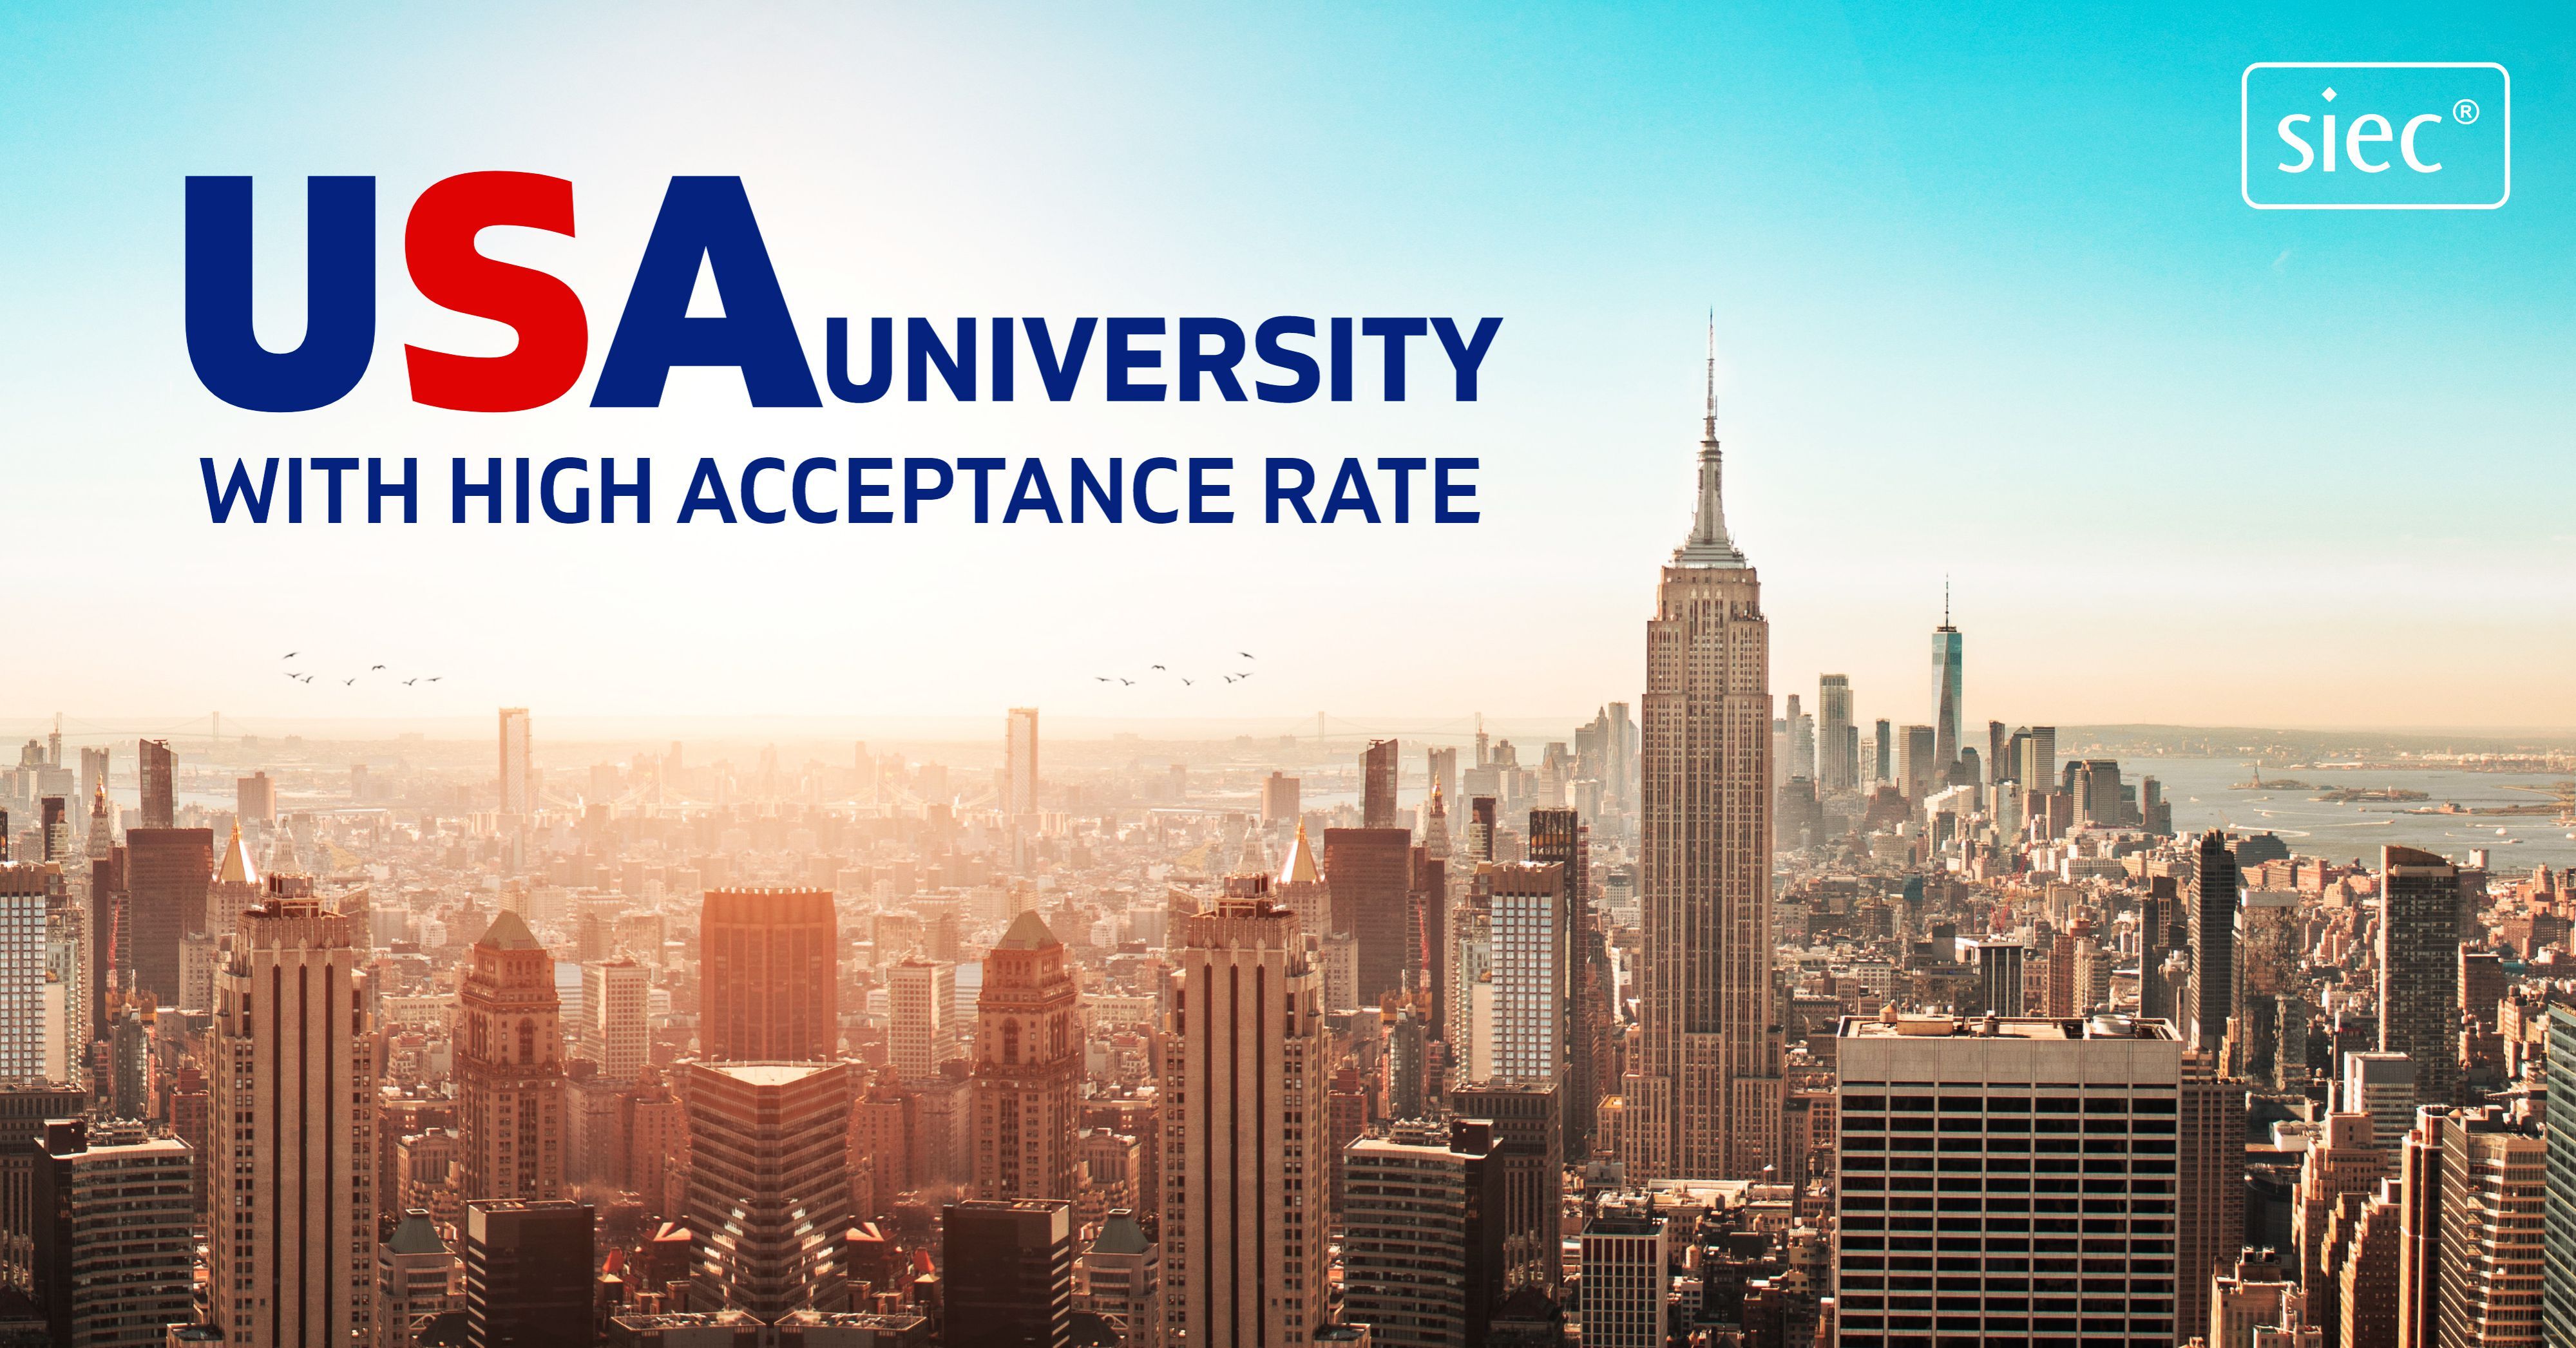 USA University with High Acceptance Rate